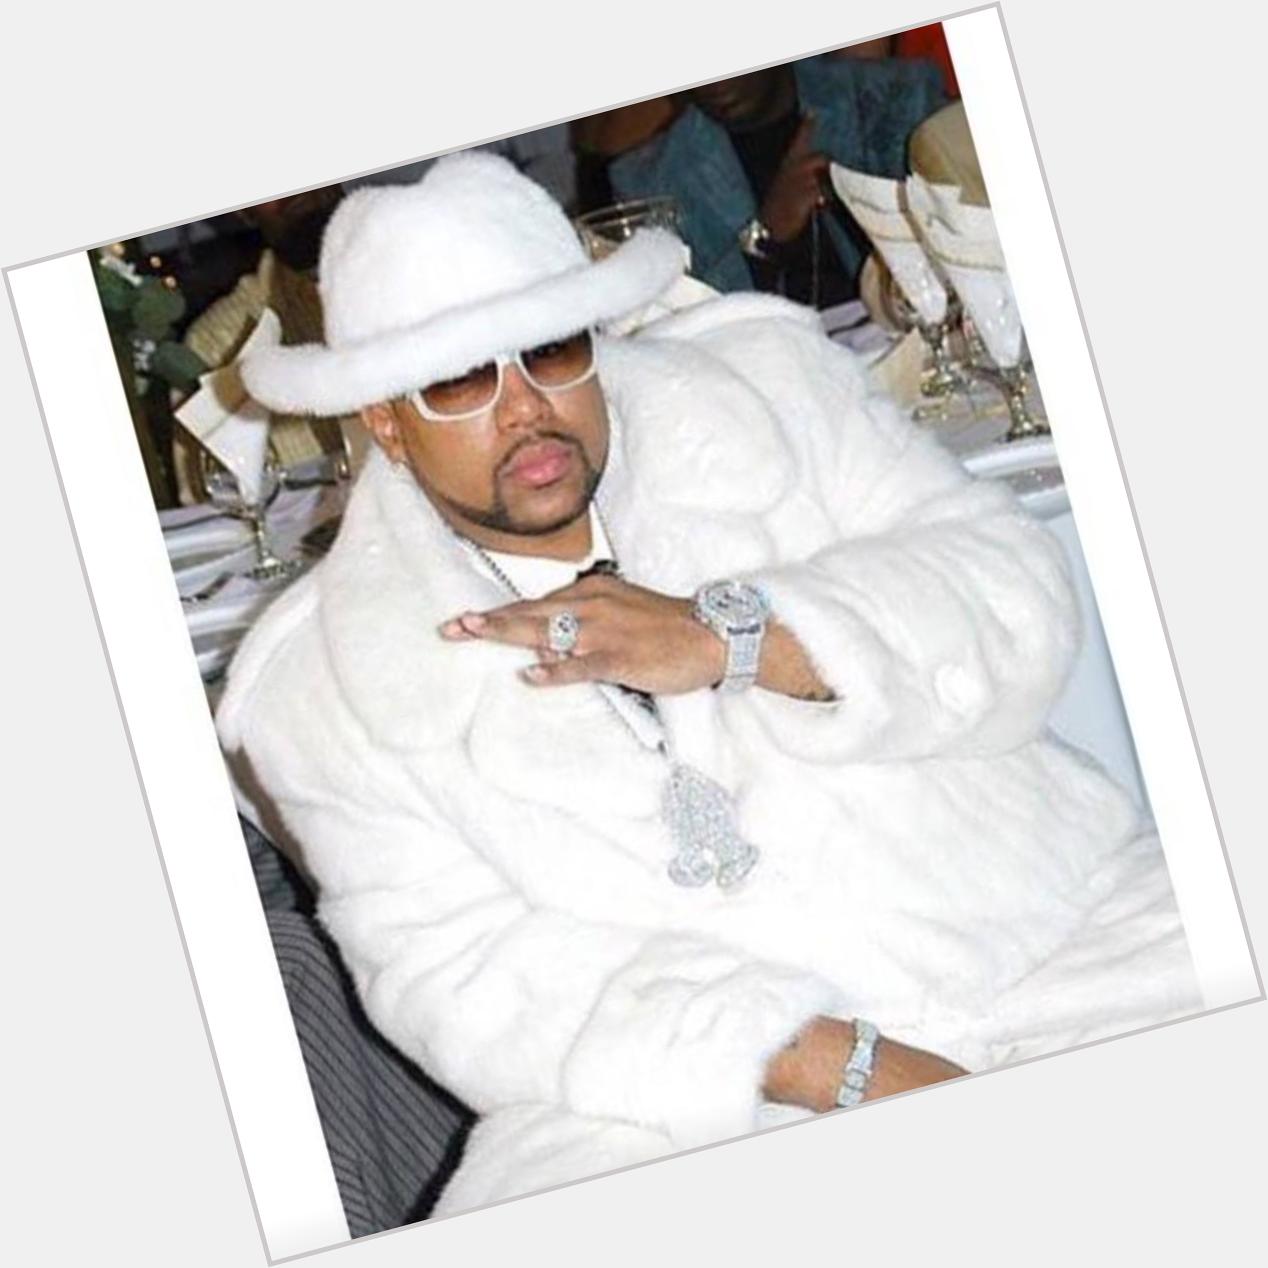 Happy birthday Pimp C  Legend to be forgotten. King Me iced out. 